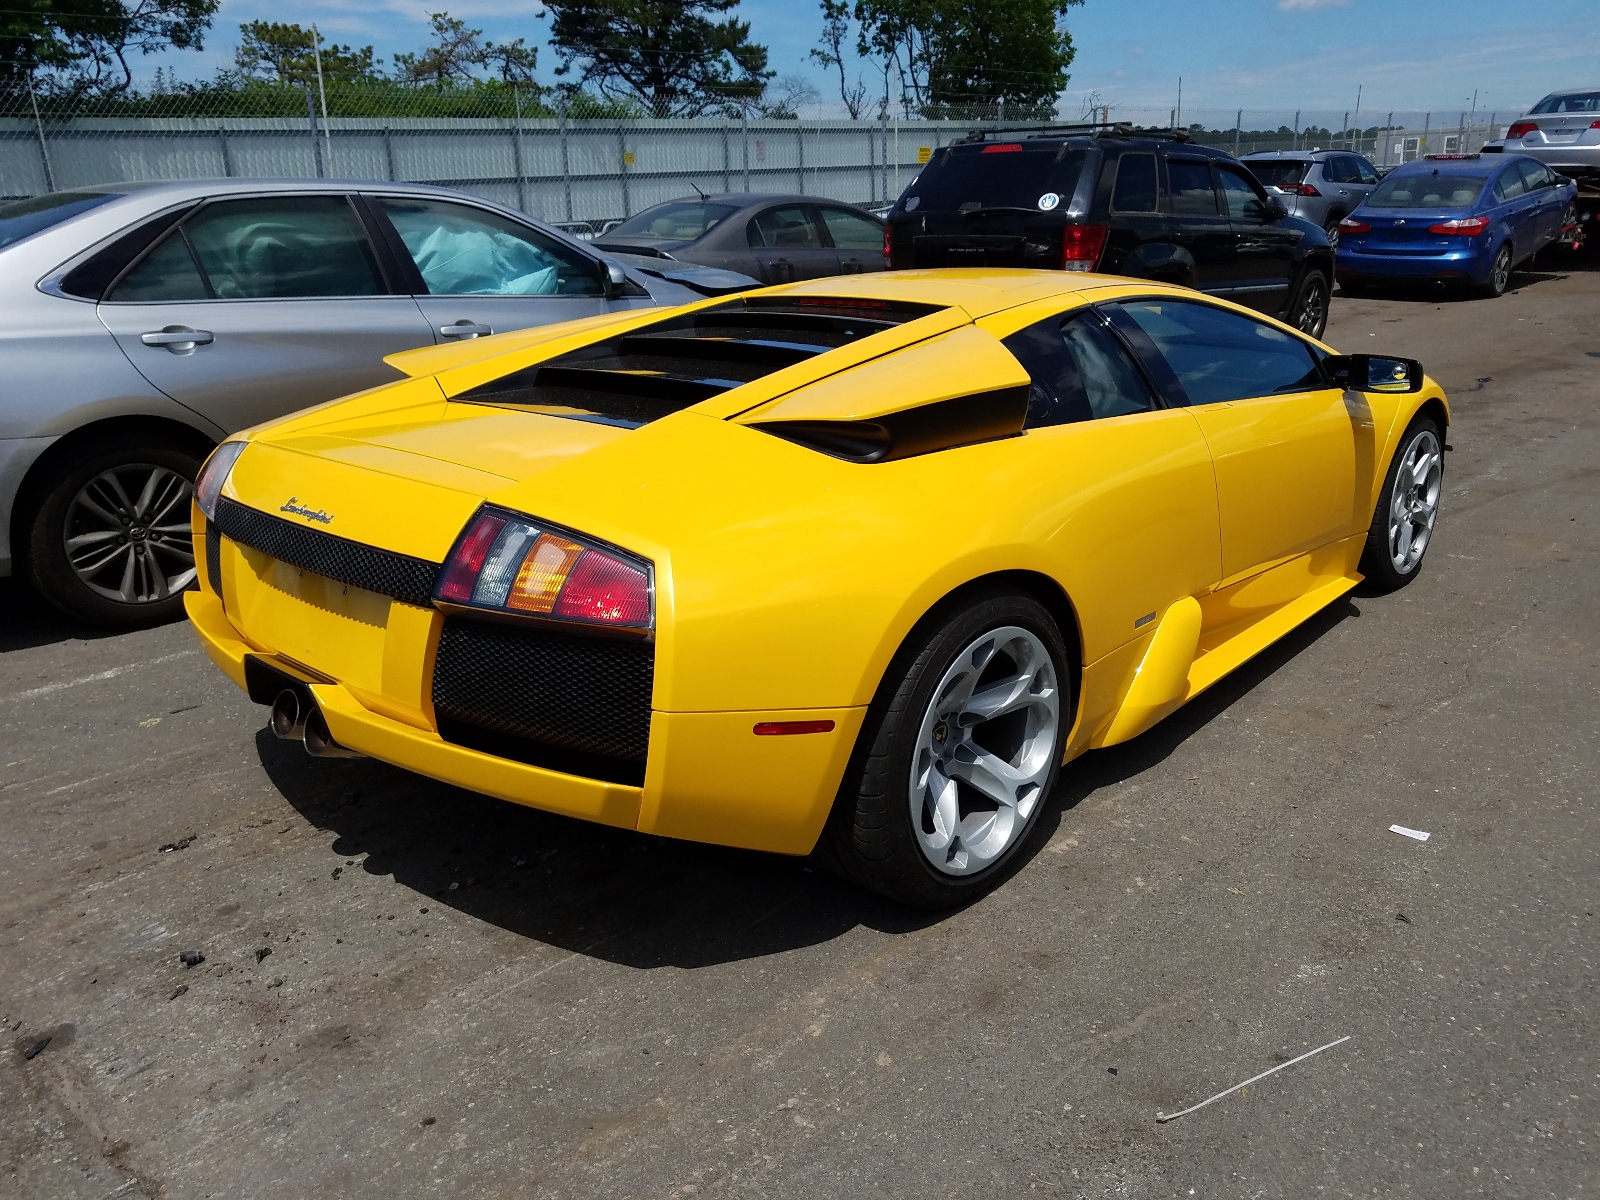 2003 Murcielago for sale at Copart Brookhaven, NY. Lot